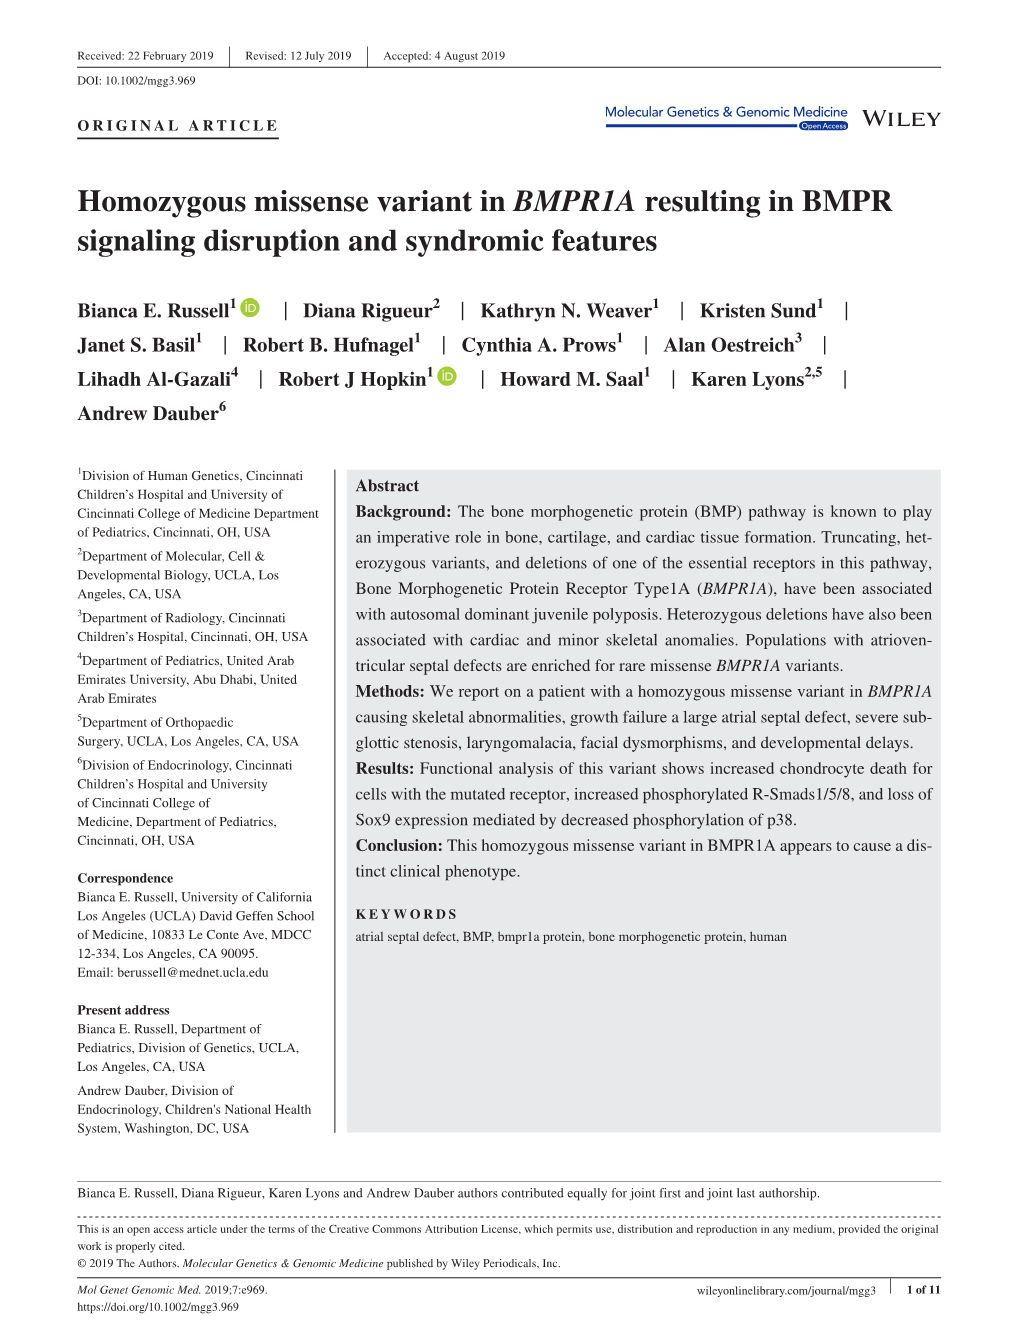 Homozygous Missense Variant in BMPR1A Resulting in BMPR Signaling Disruption and Syndromic Features